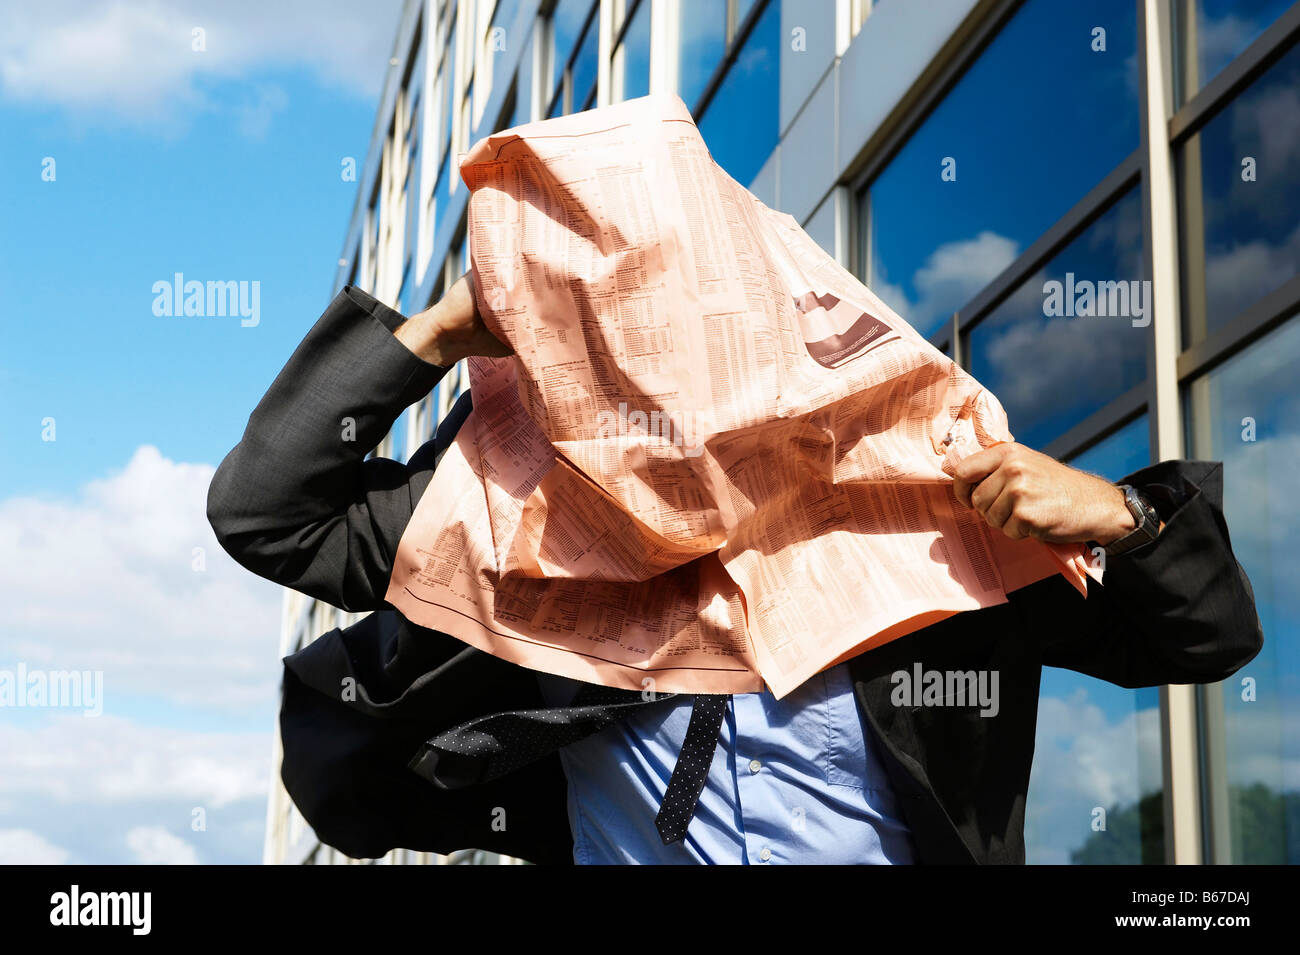 Businessman with newspaper over face Stock Photo